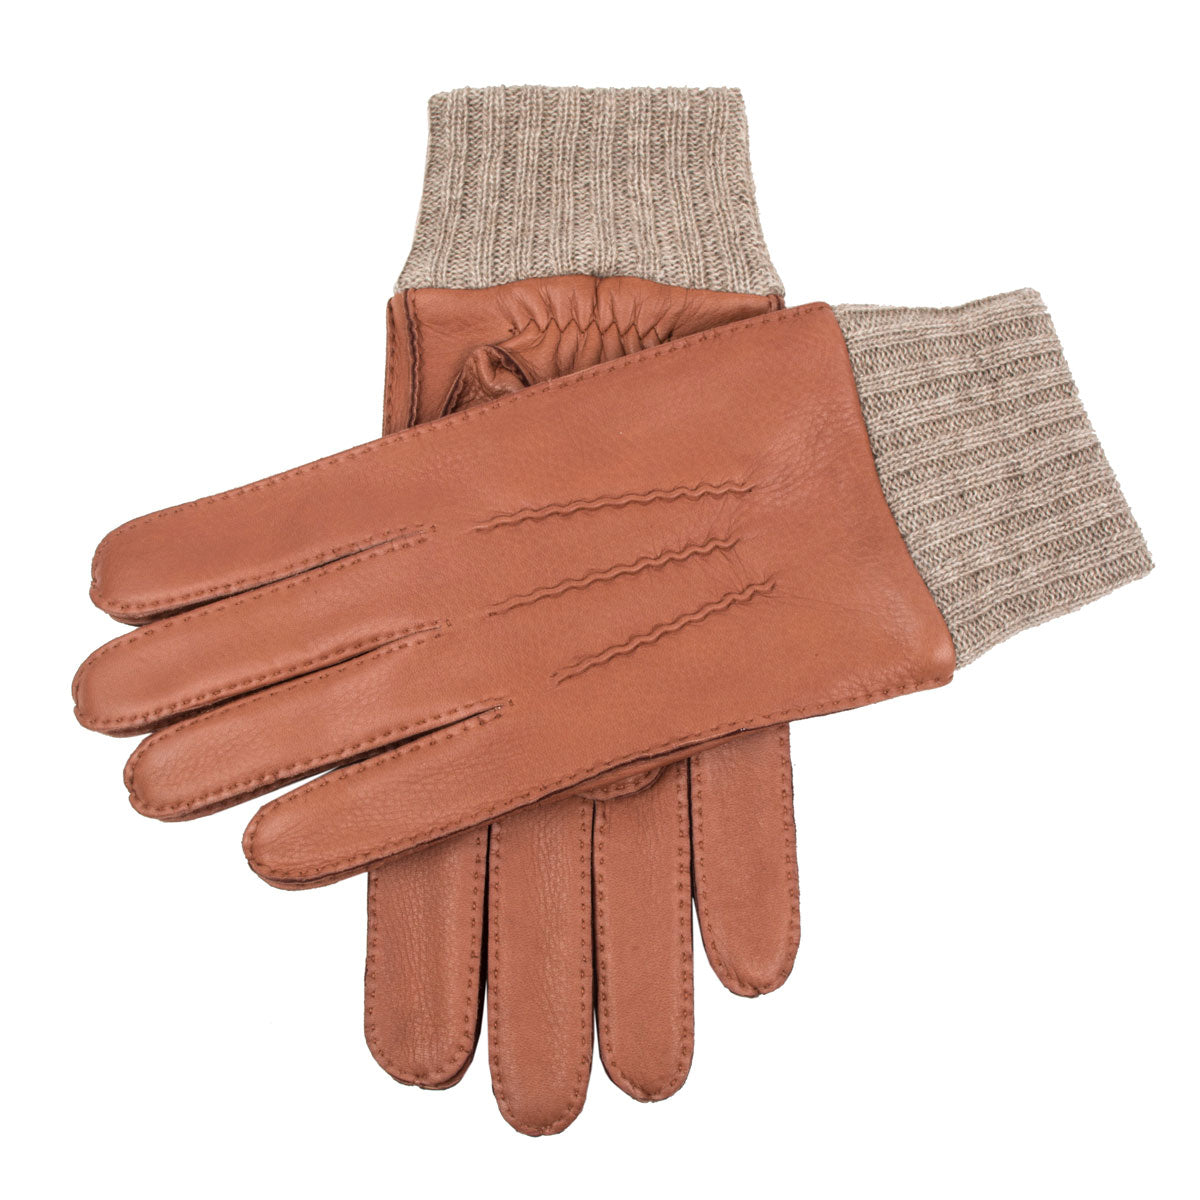 Men's handsewn cashmere-lined deerskin leather gloves with knitted cashmere cuffs in havana/beige